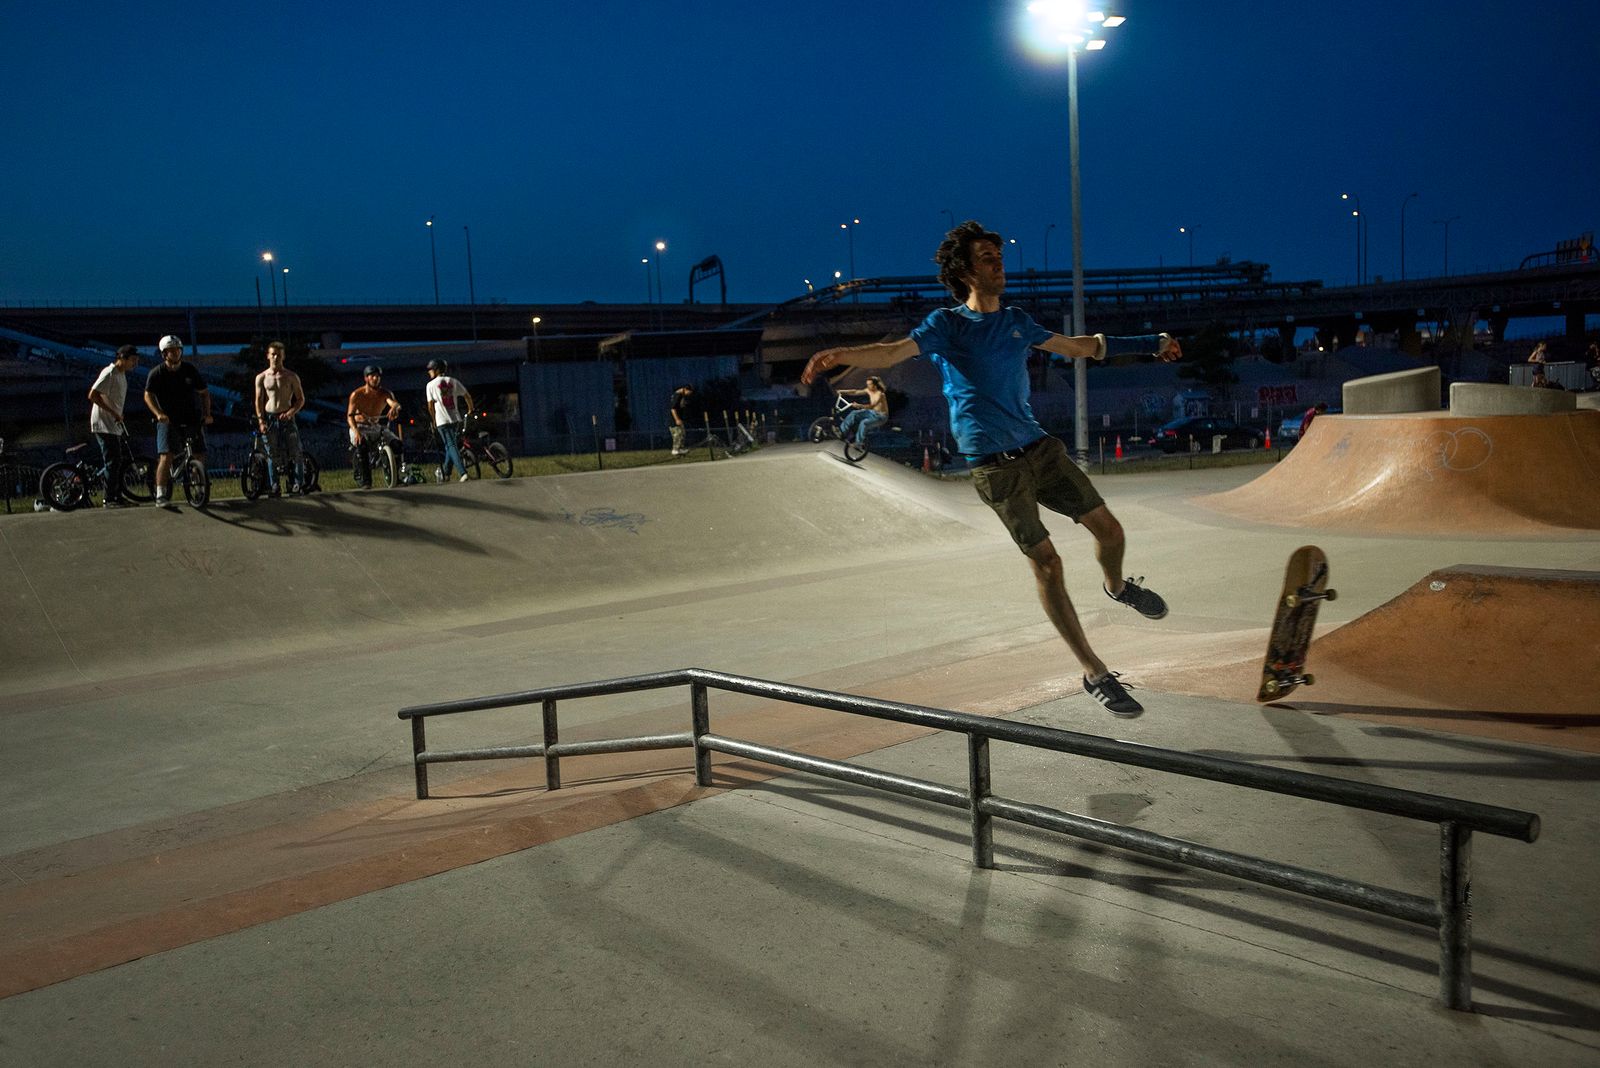 © Steven Edson - Image from the Skateboard Park photography project